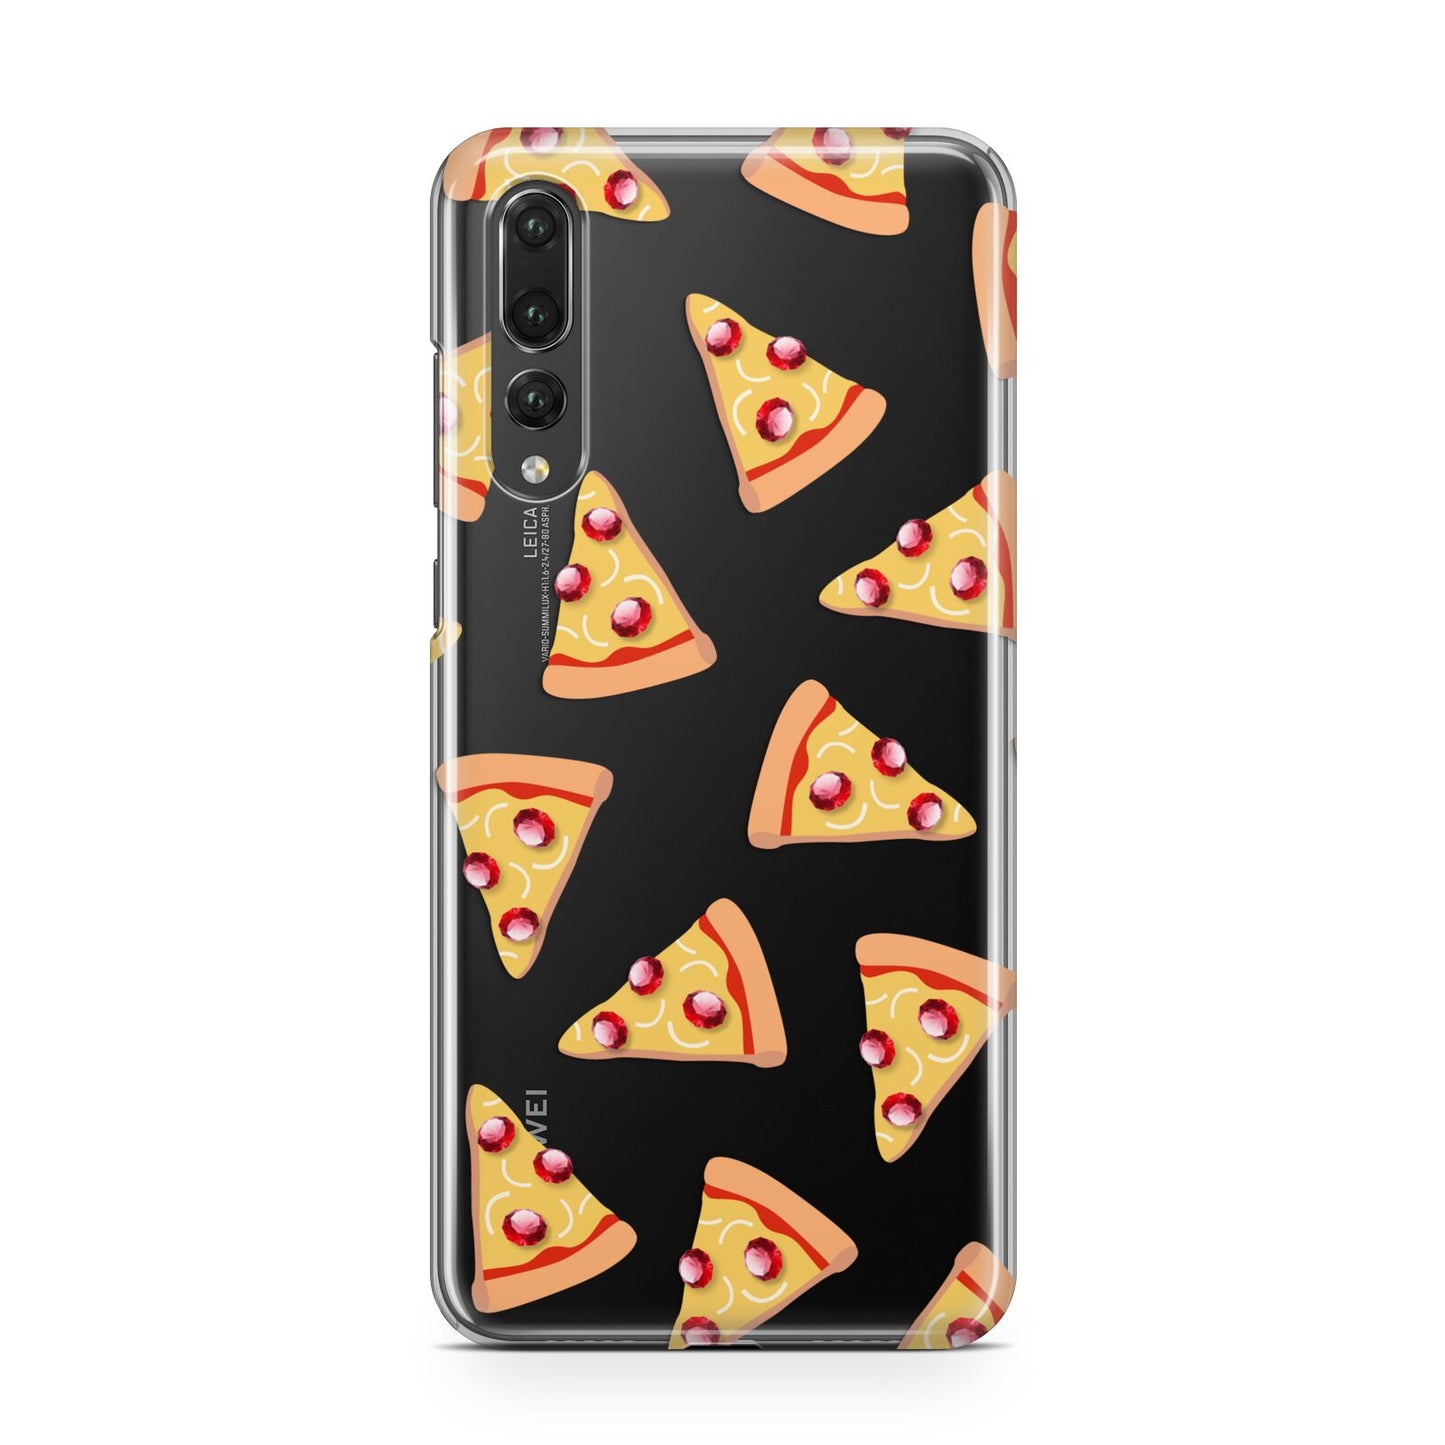 Rubies on Cartoon Pizza Slices Huawei P20 Pro Phone Case